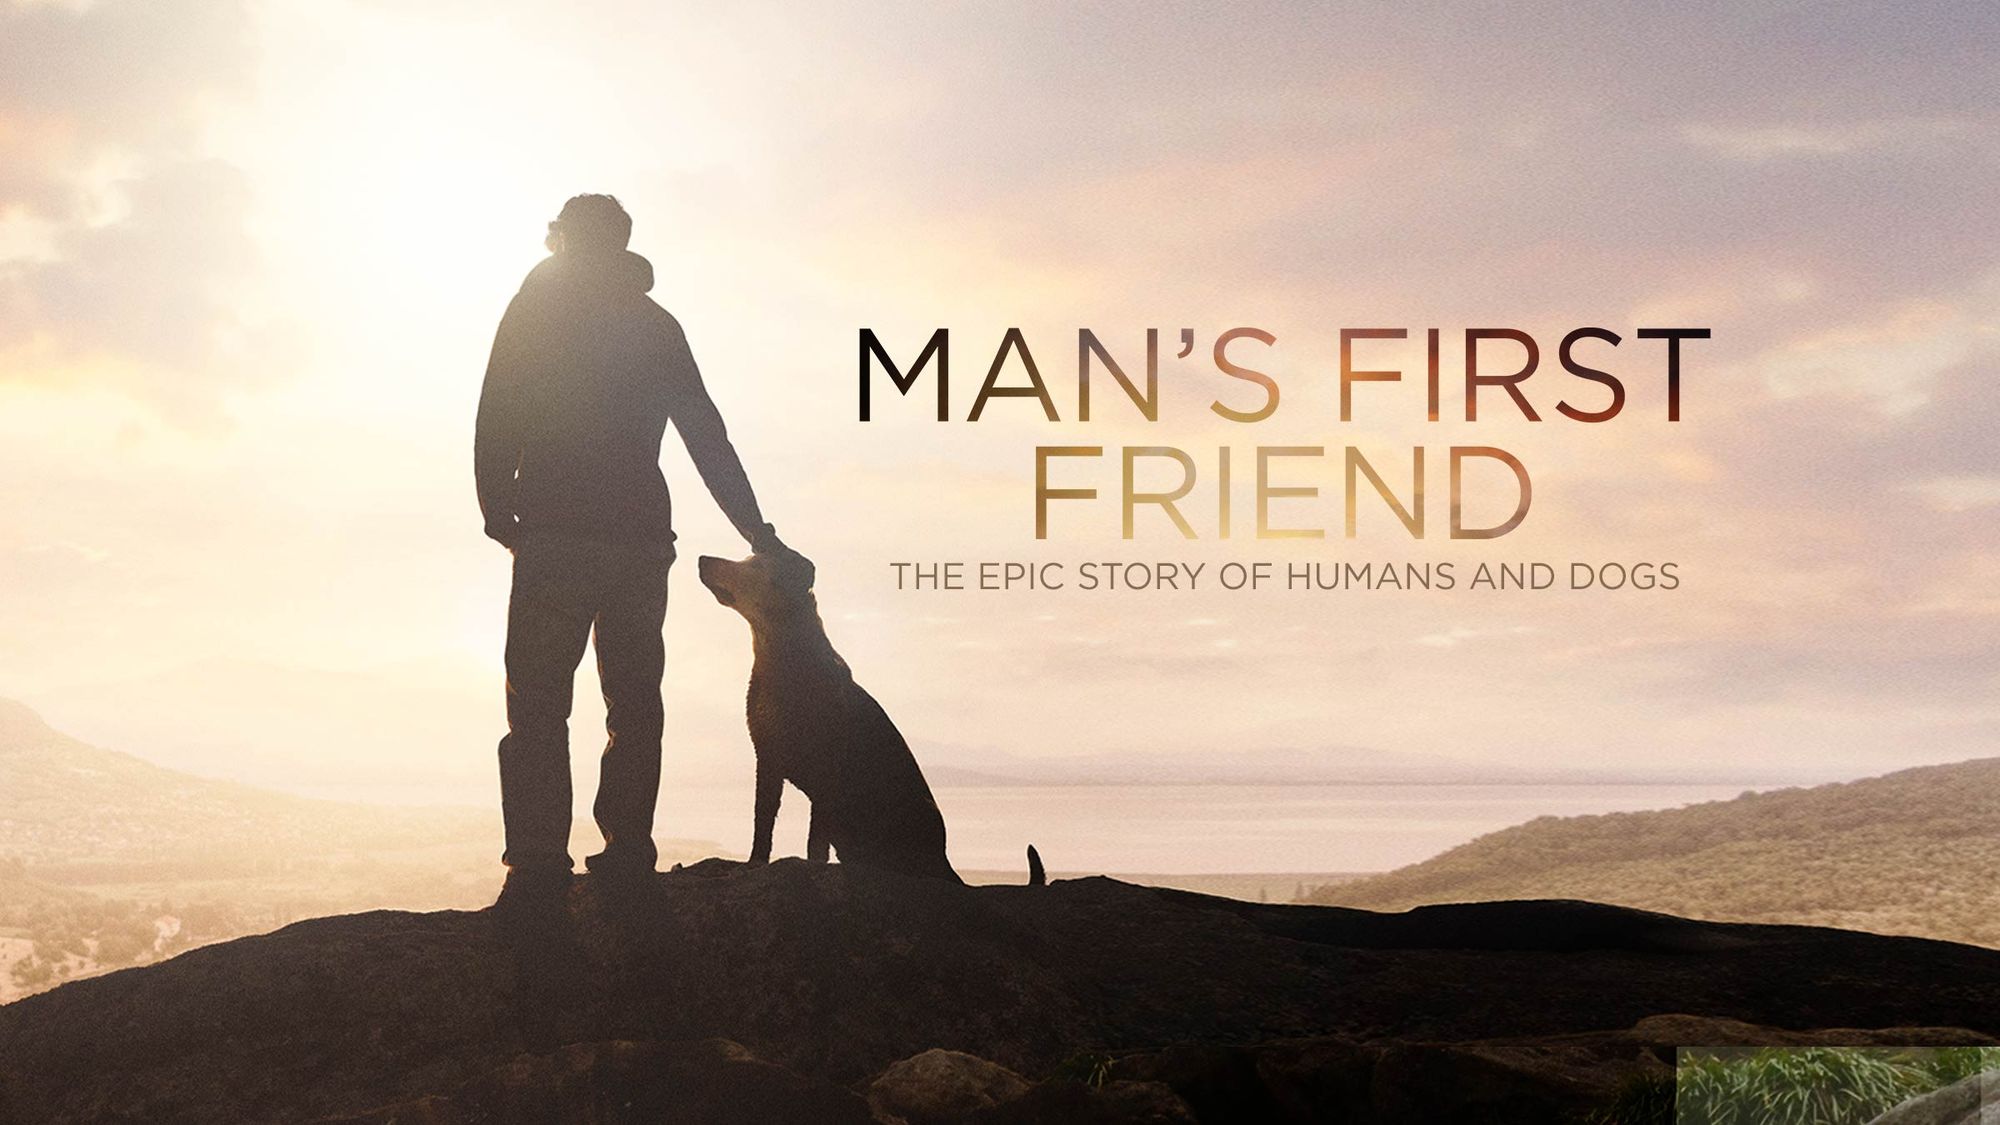 Man’s First Friend: Explore How Dog and Man Evolved Together to Become Best Friends.